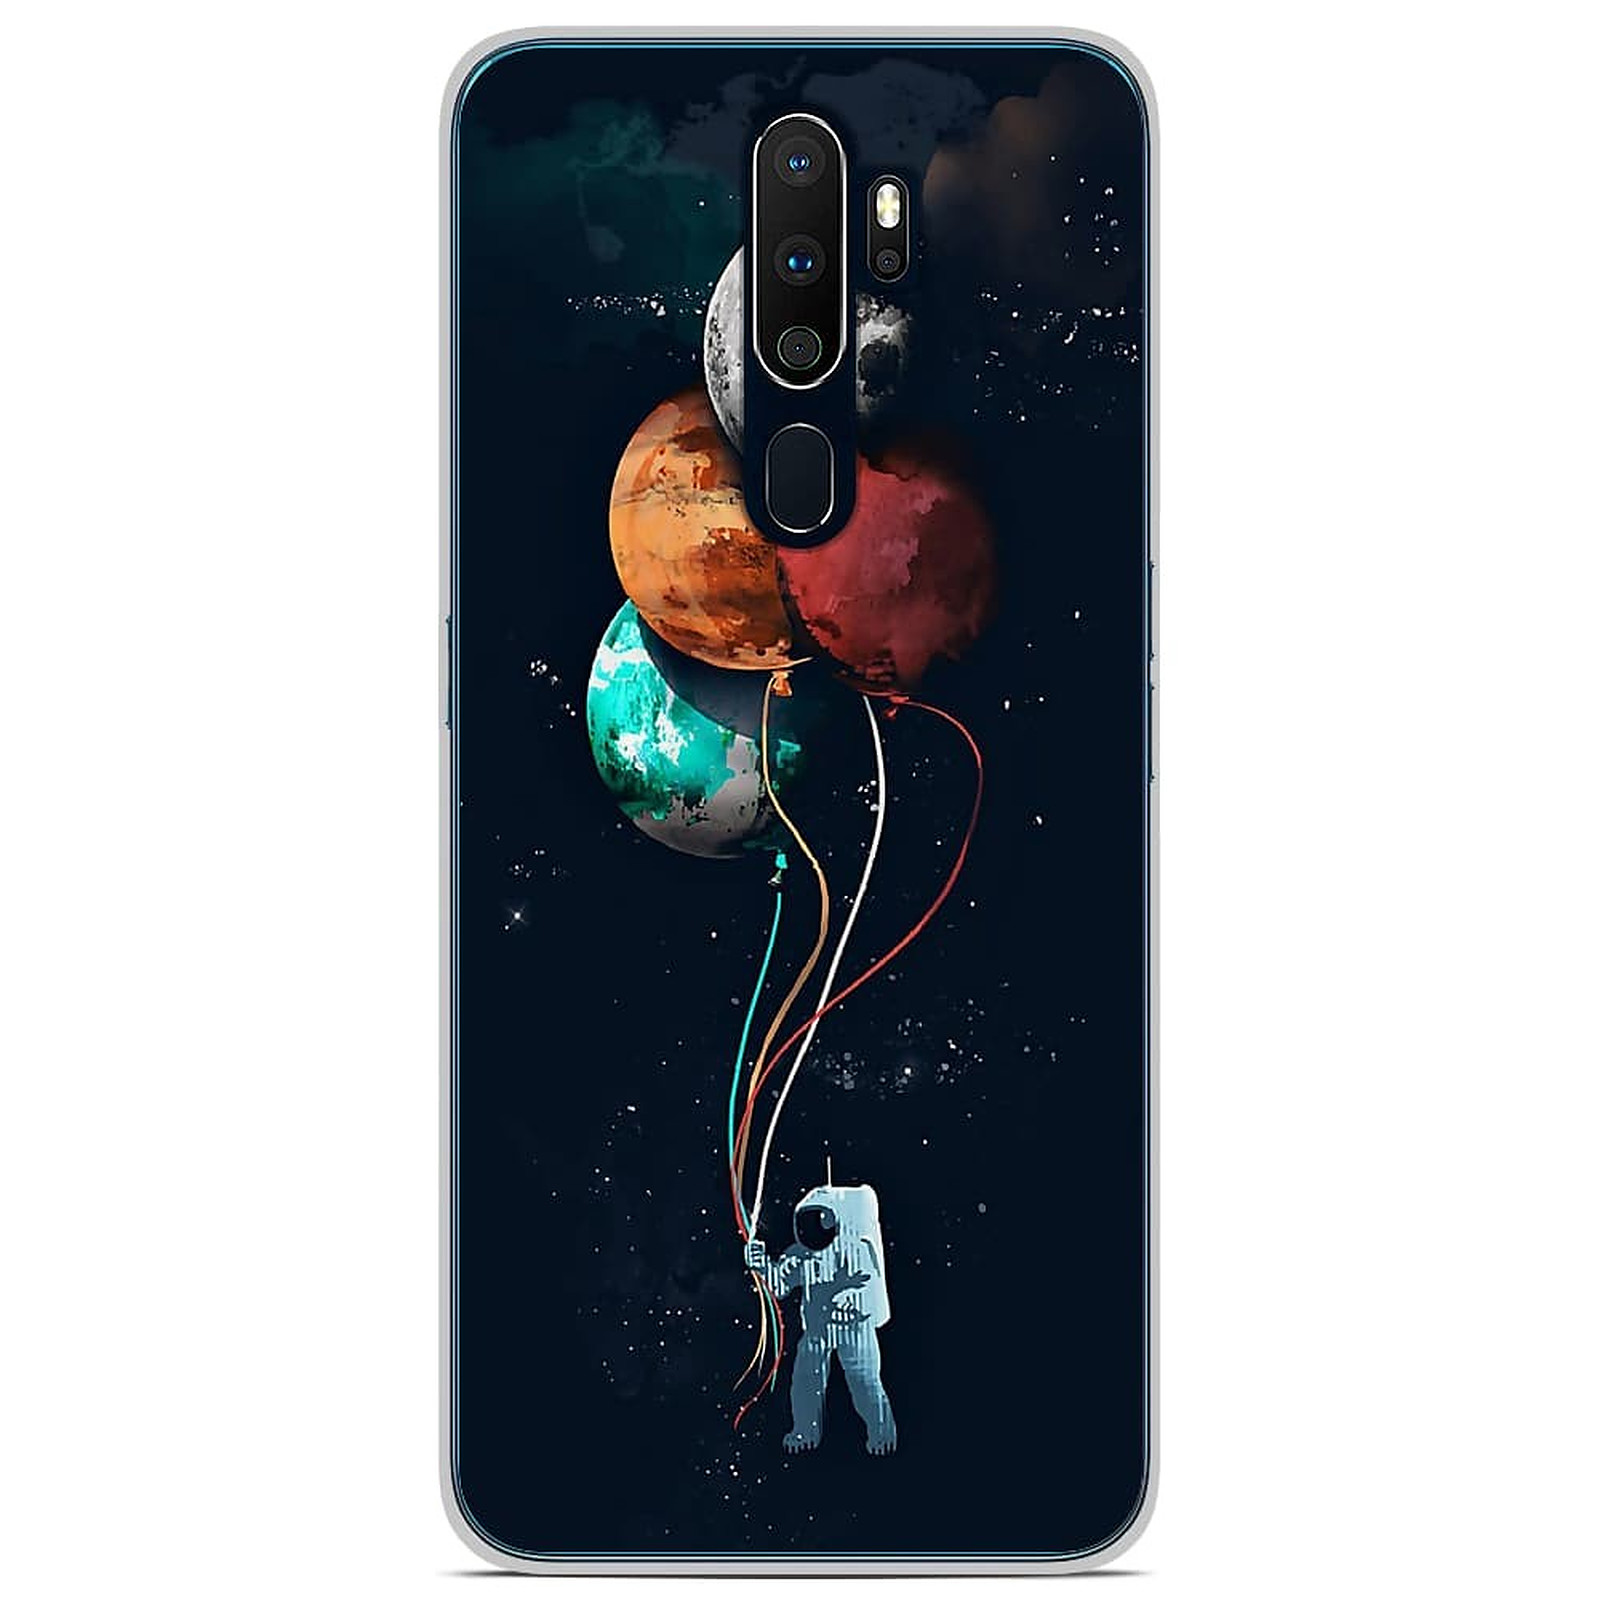 1001 Coques Coque silicone gel Oppo A5 2020 motif Cosmonaute aux Ballons - Coque telephone 1001Coques